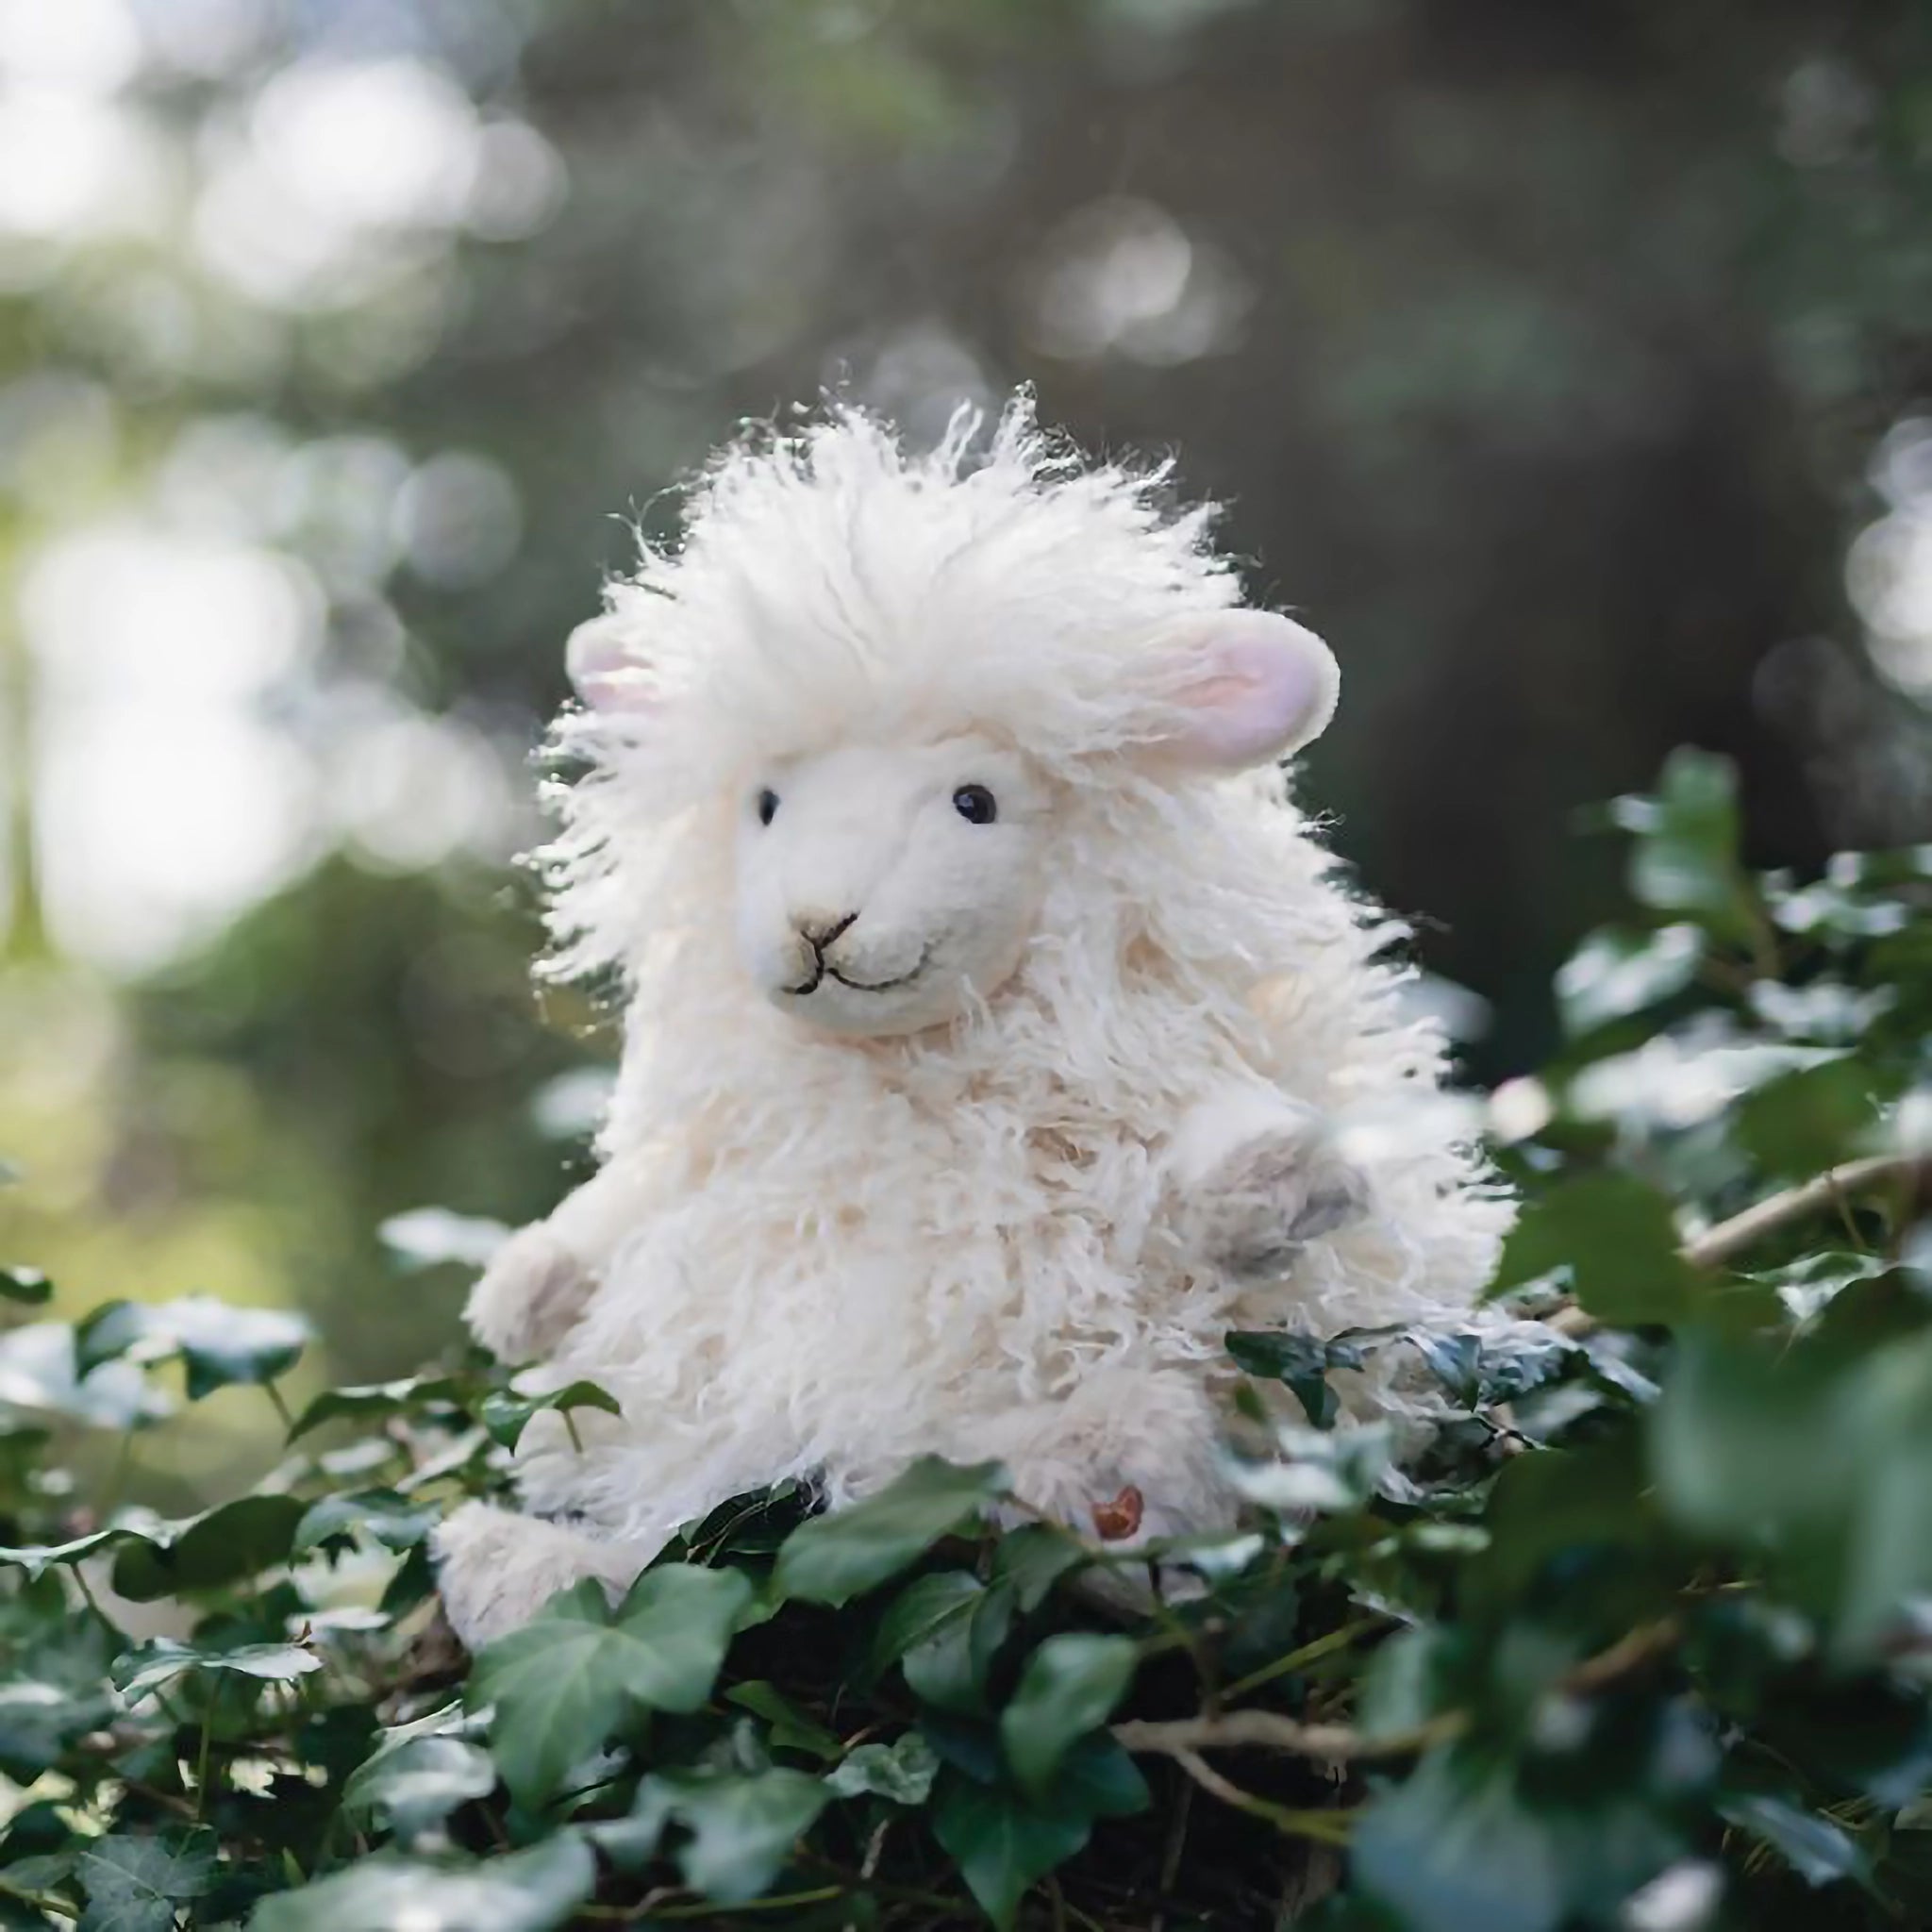 A stuffed sheep plush toy with the Wrendale logo embroidered on the bottom of its foot posed in ivy